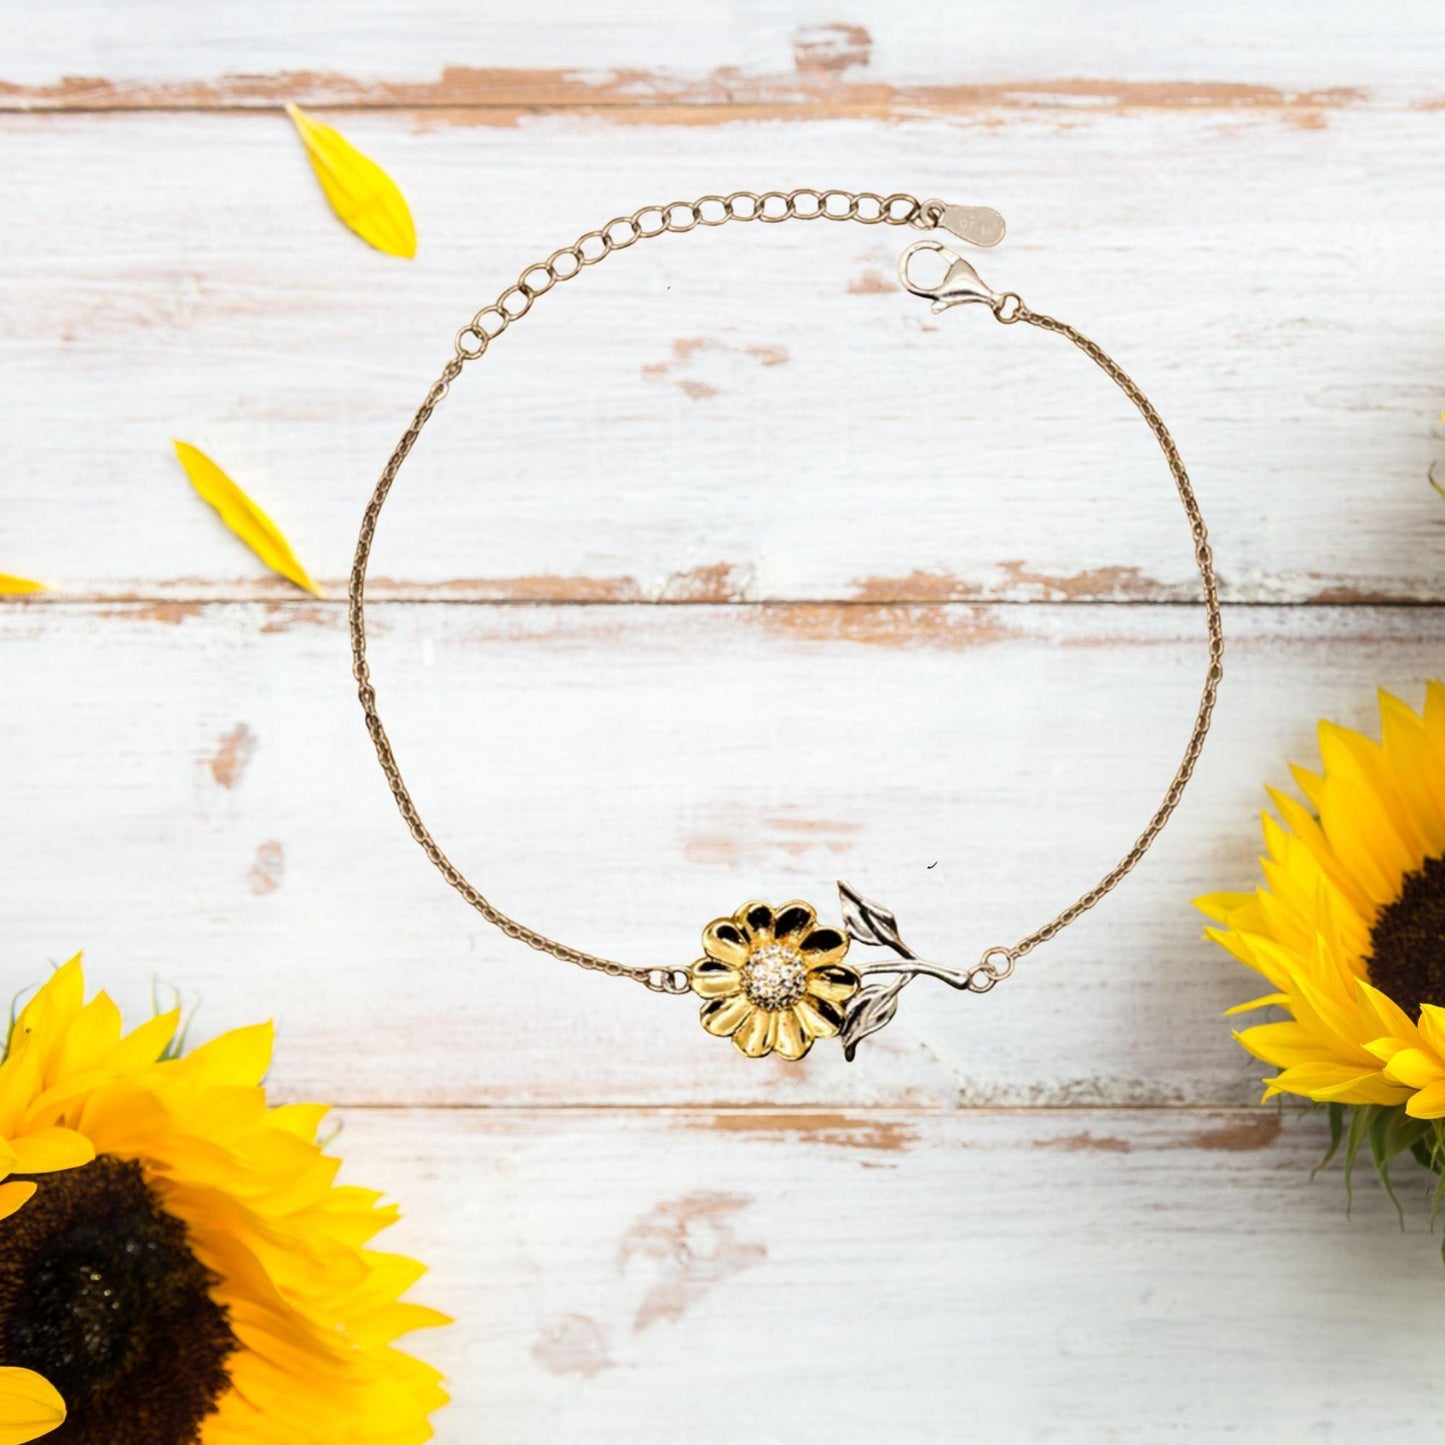 Funeral Director Sunflower Bracelet - Thanks for being who you are - Birthday Christmas Jewelry Gifts Coworkers Colleague Boss - Mallard Moon Gift Shop